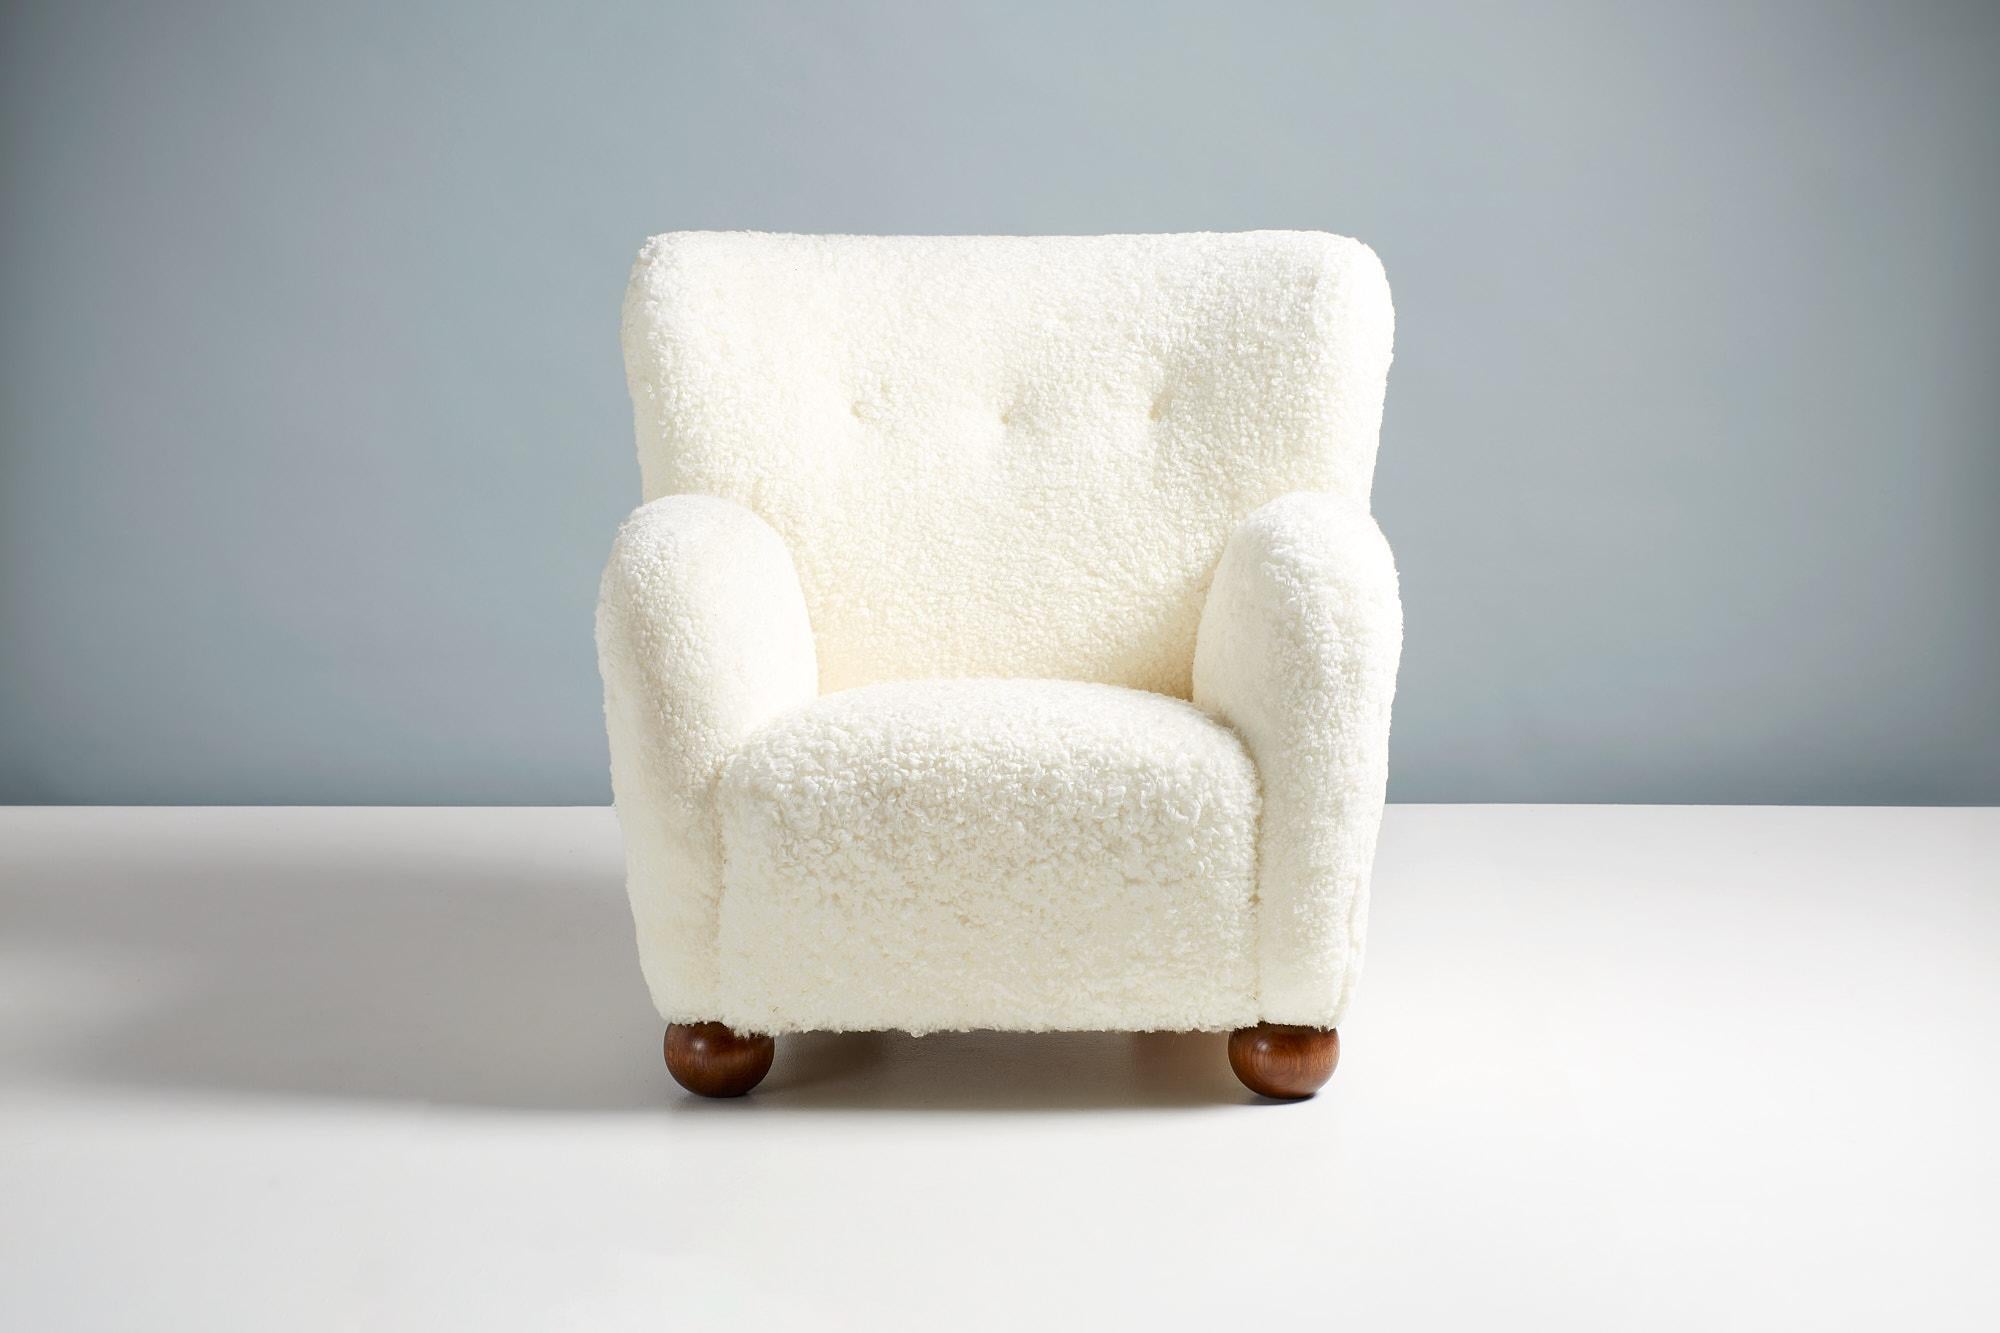 Dagmar design

KARU lounge chair

A pair of custom-made lounge chairs developed & produced at our workshops in London using the highest quality materials. These examples are upholstered in ‘Off-White’ shearling with custom solid fumed oak ball